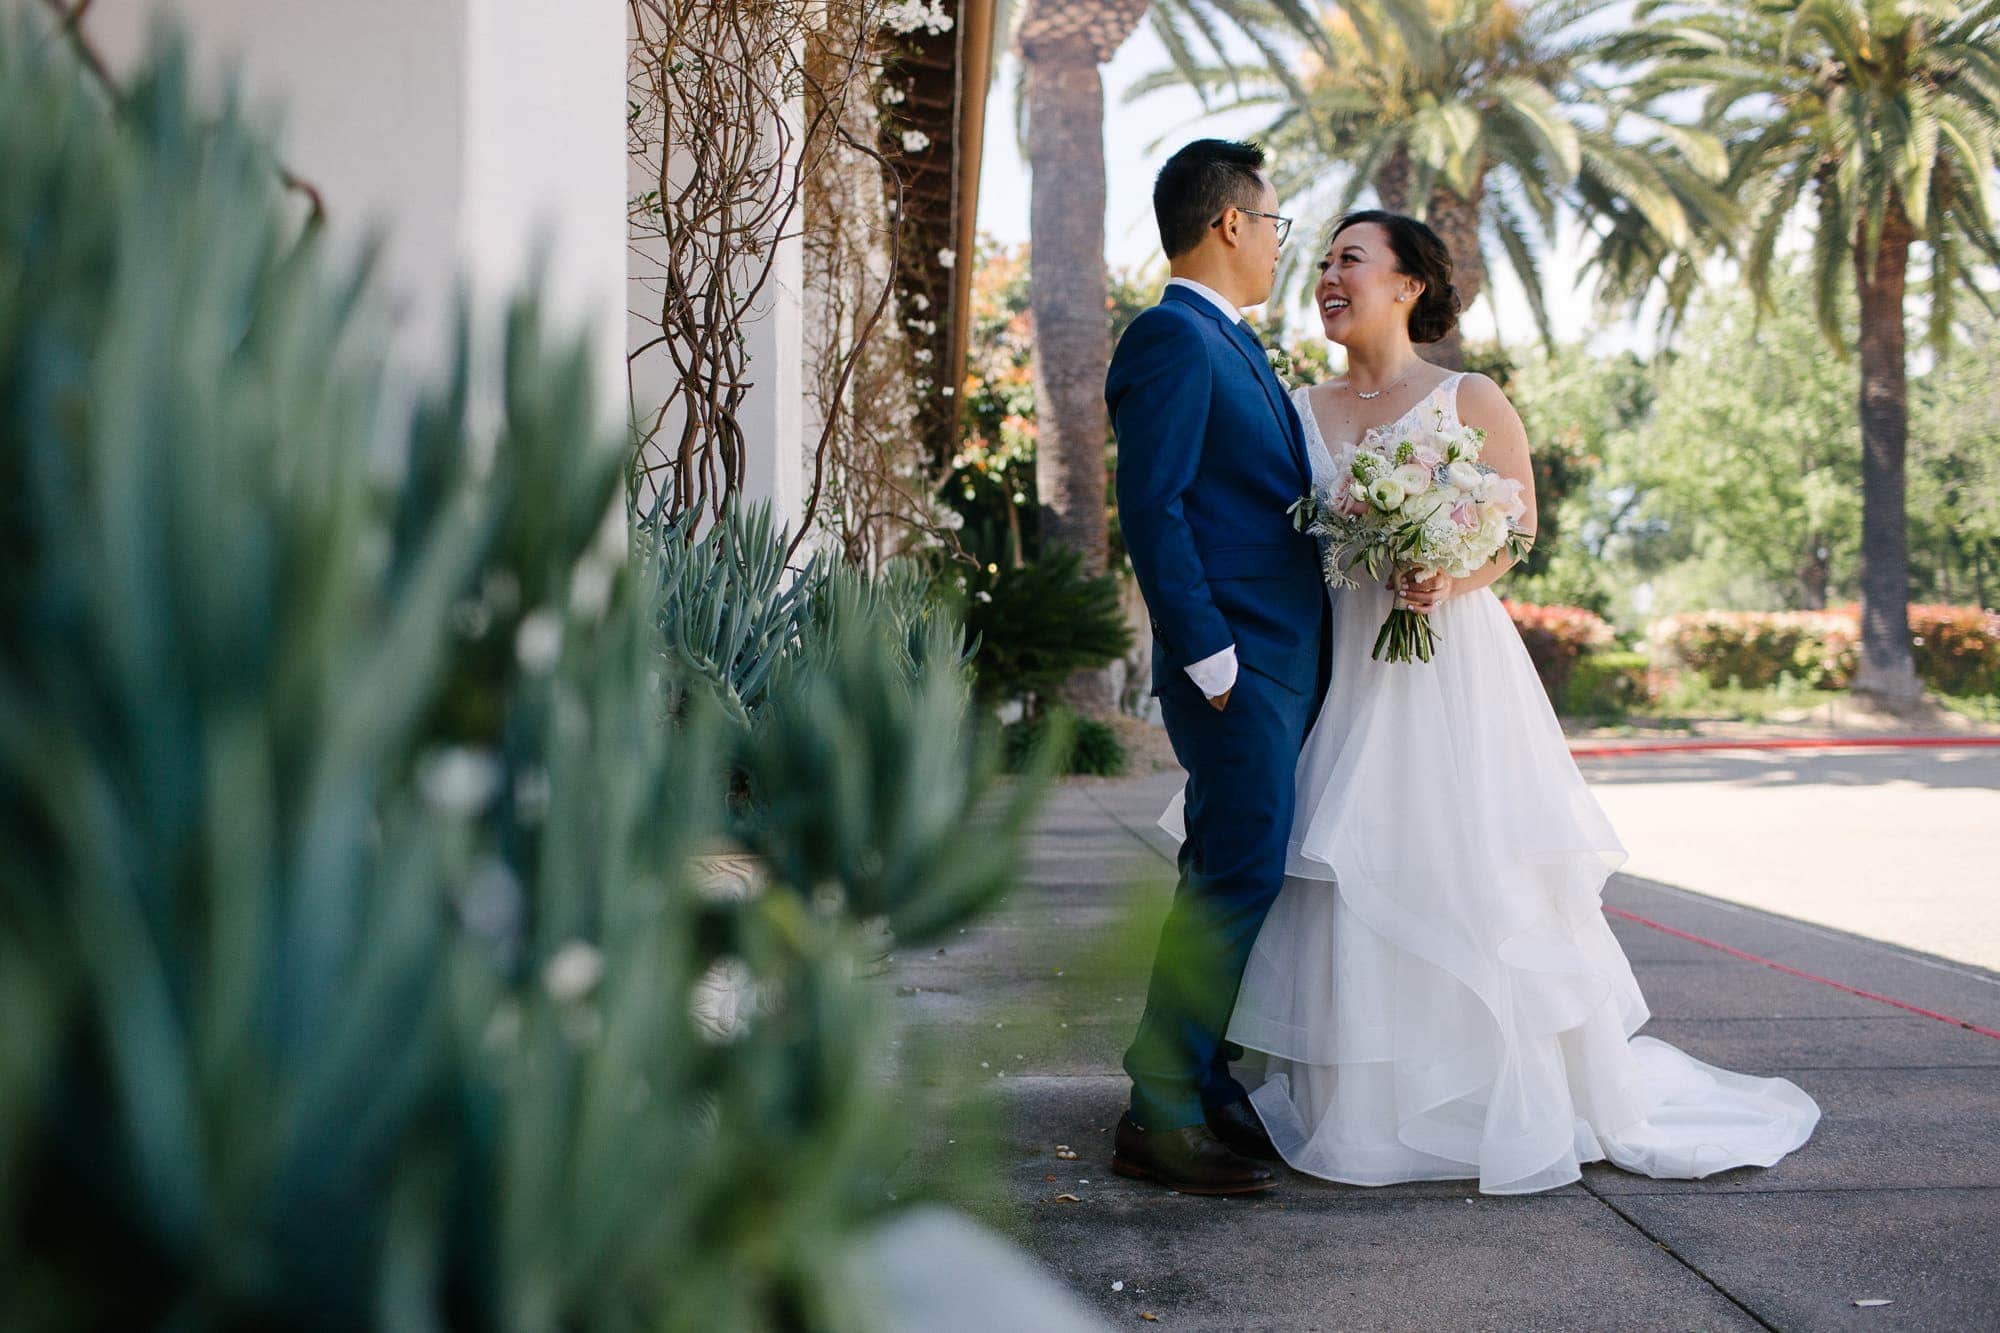 Outdoor wedding portraits with palm trees in San Ramon